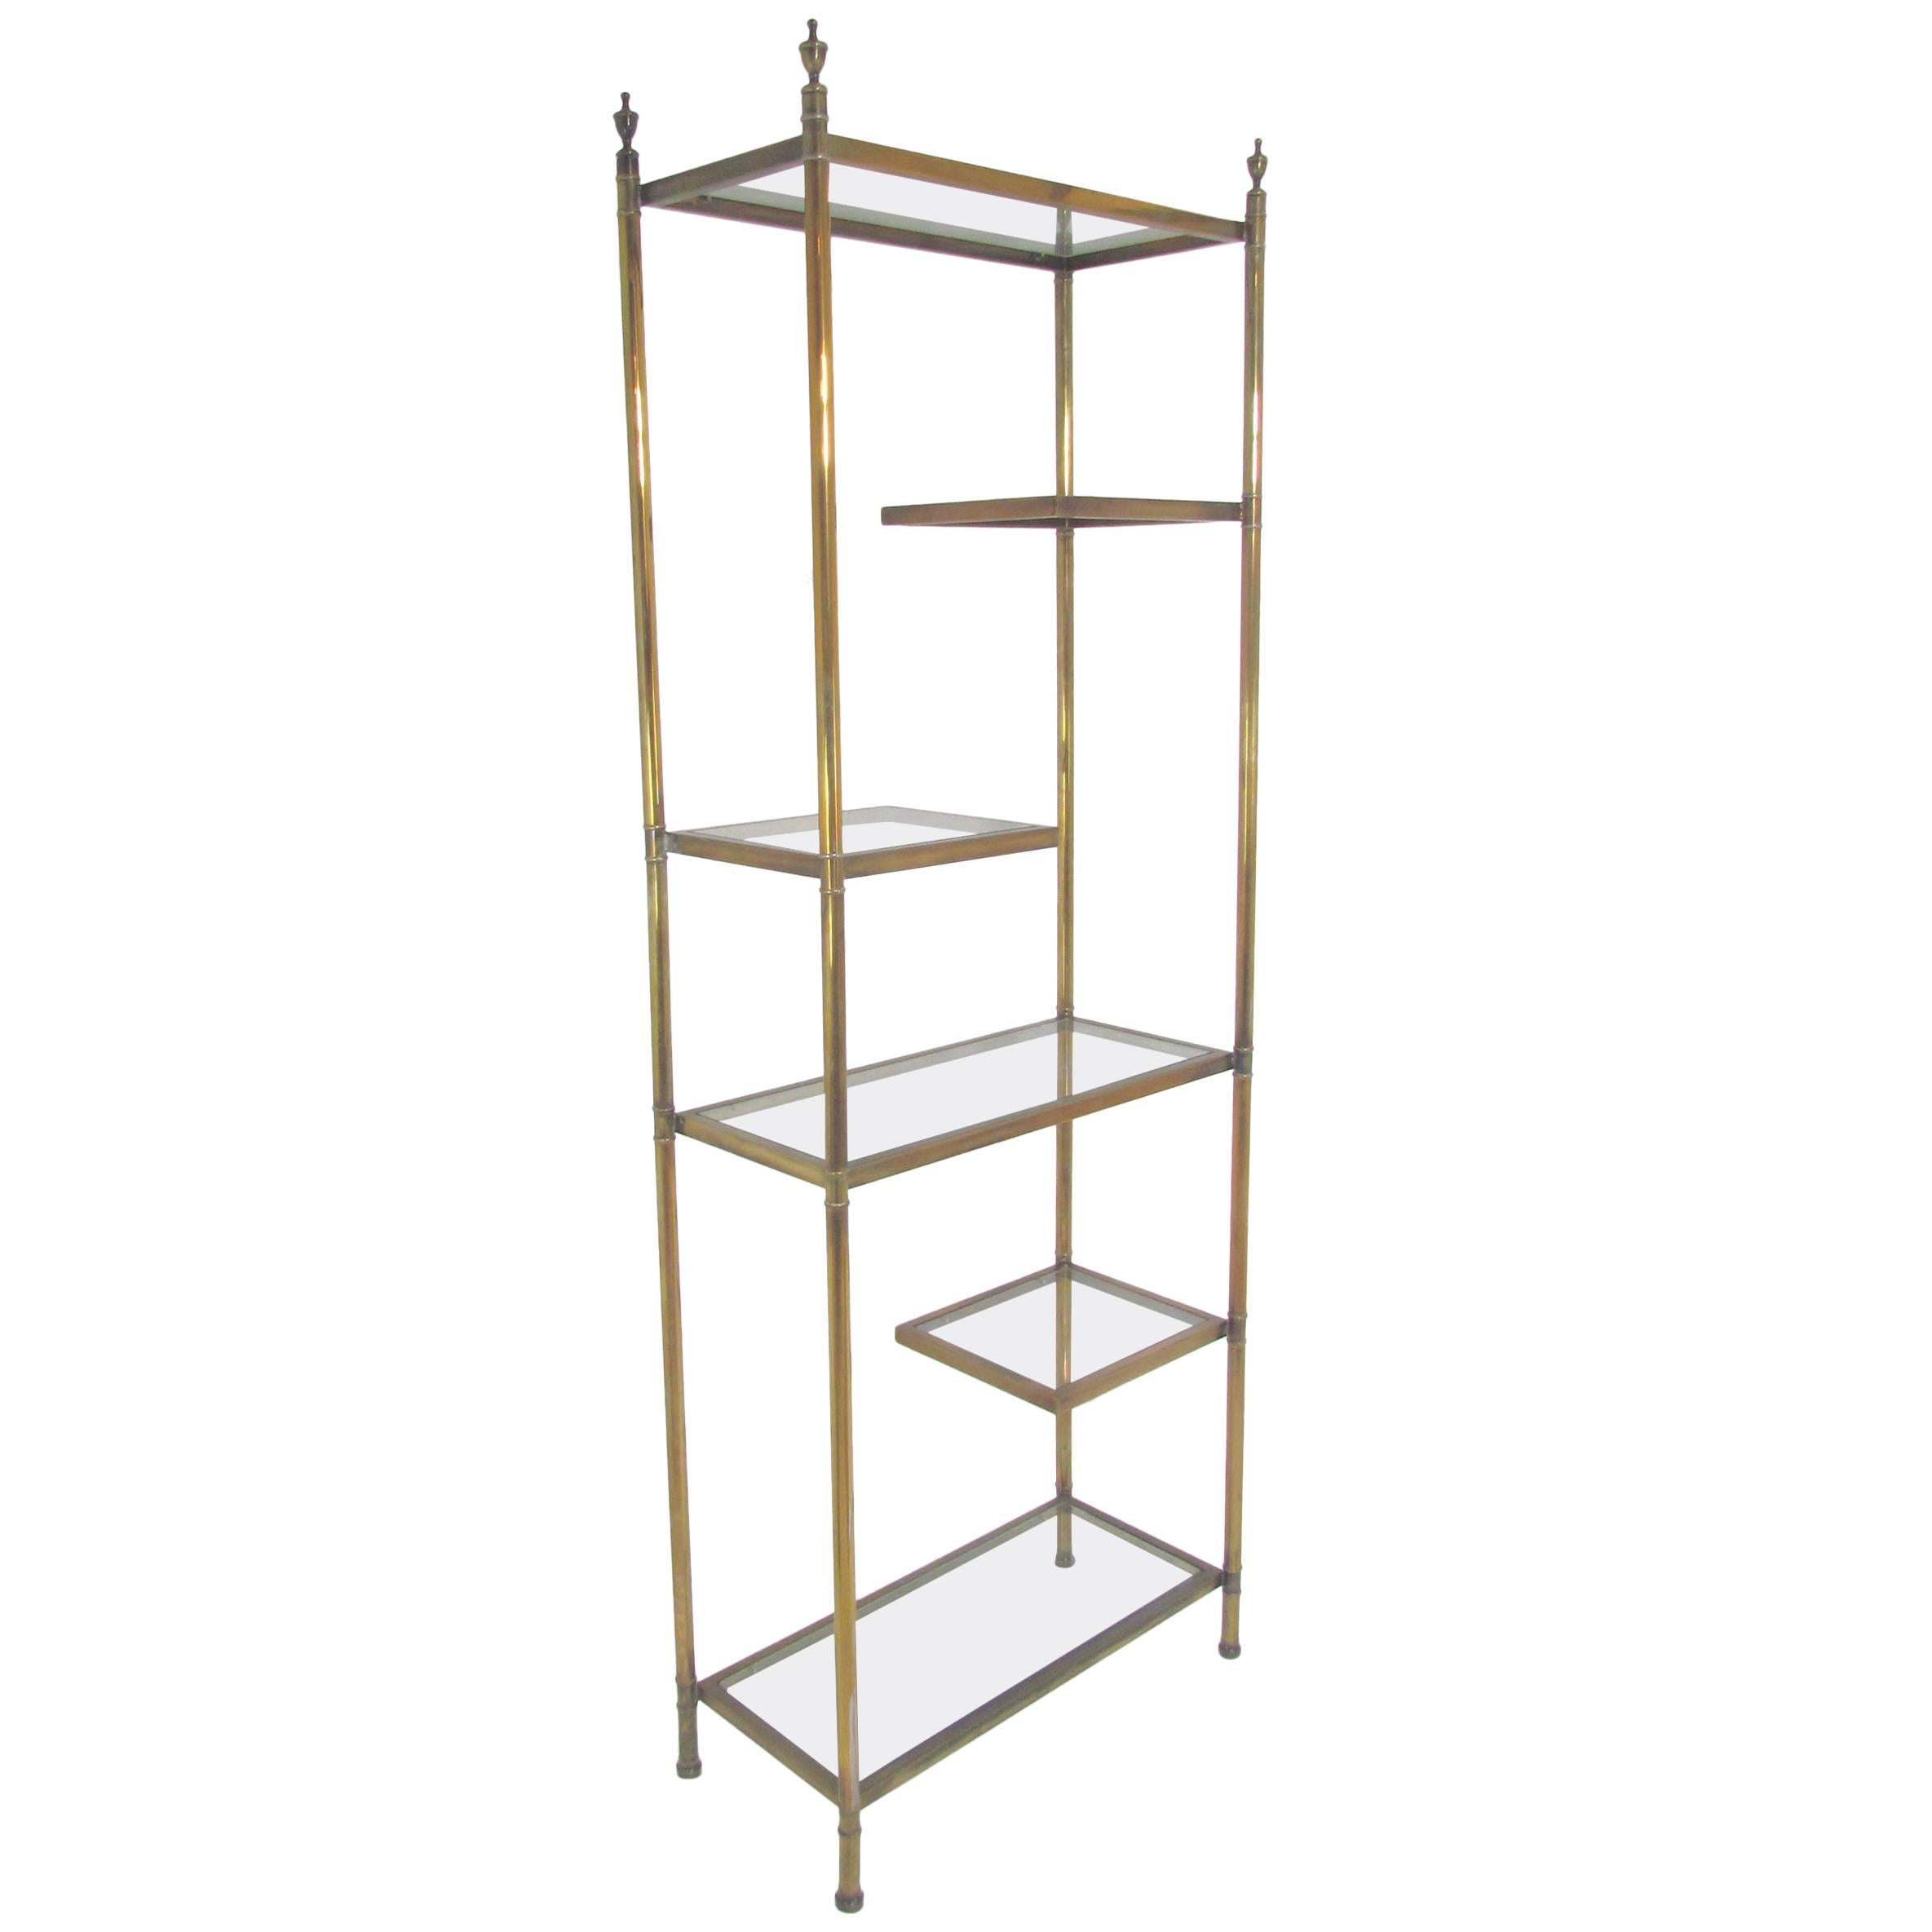 Hollywood Regency Étagère in Brass with Cantilevered Display Shelves